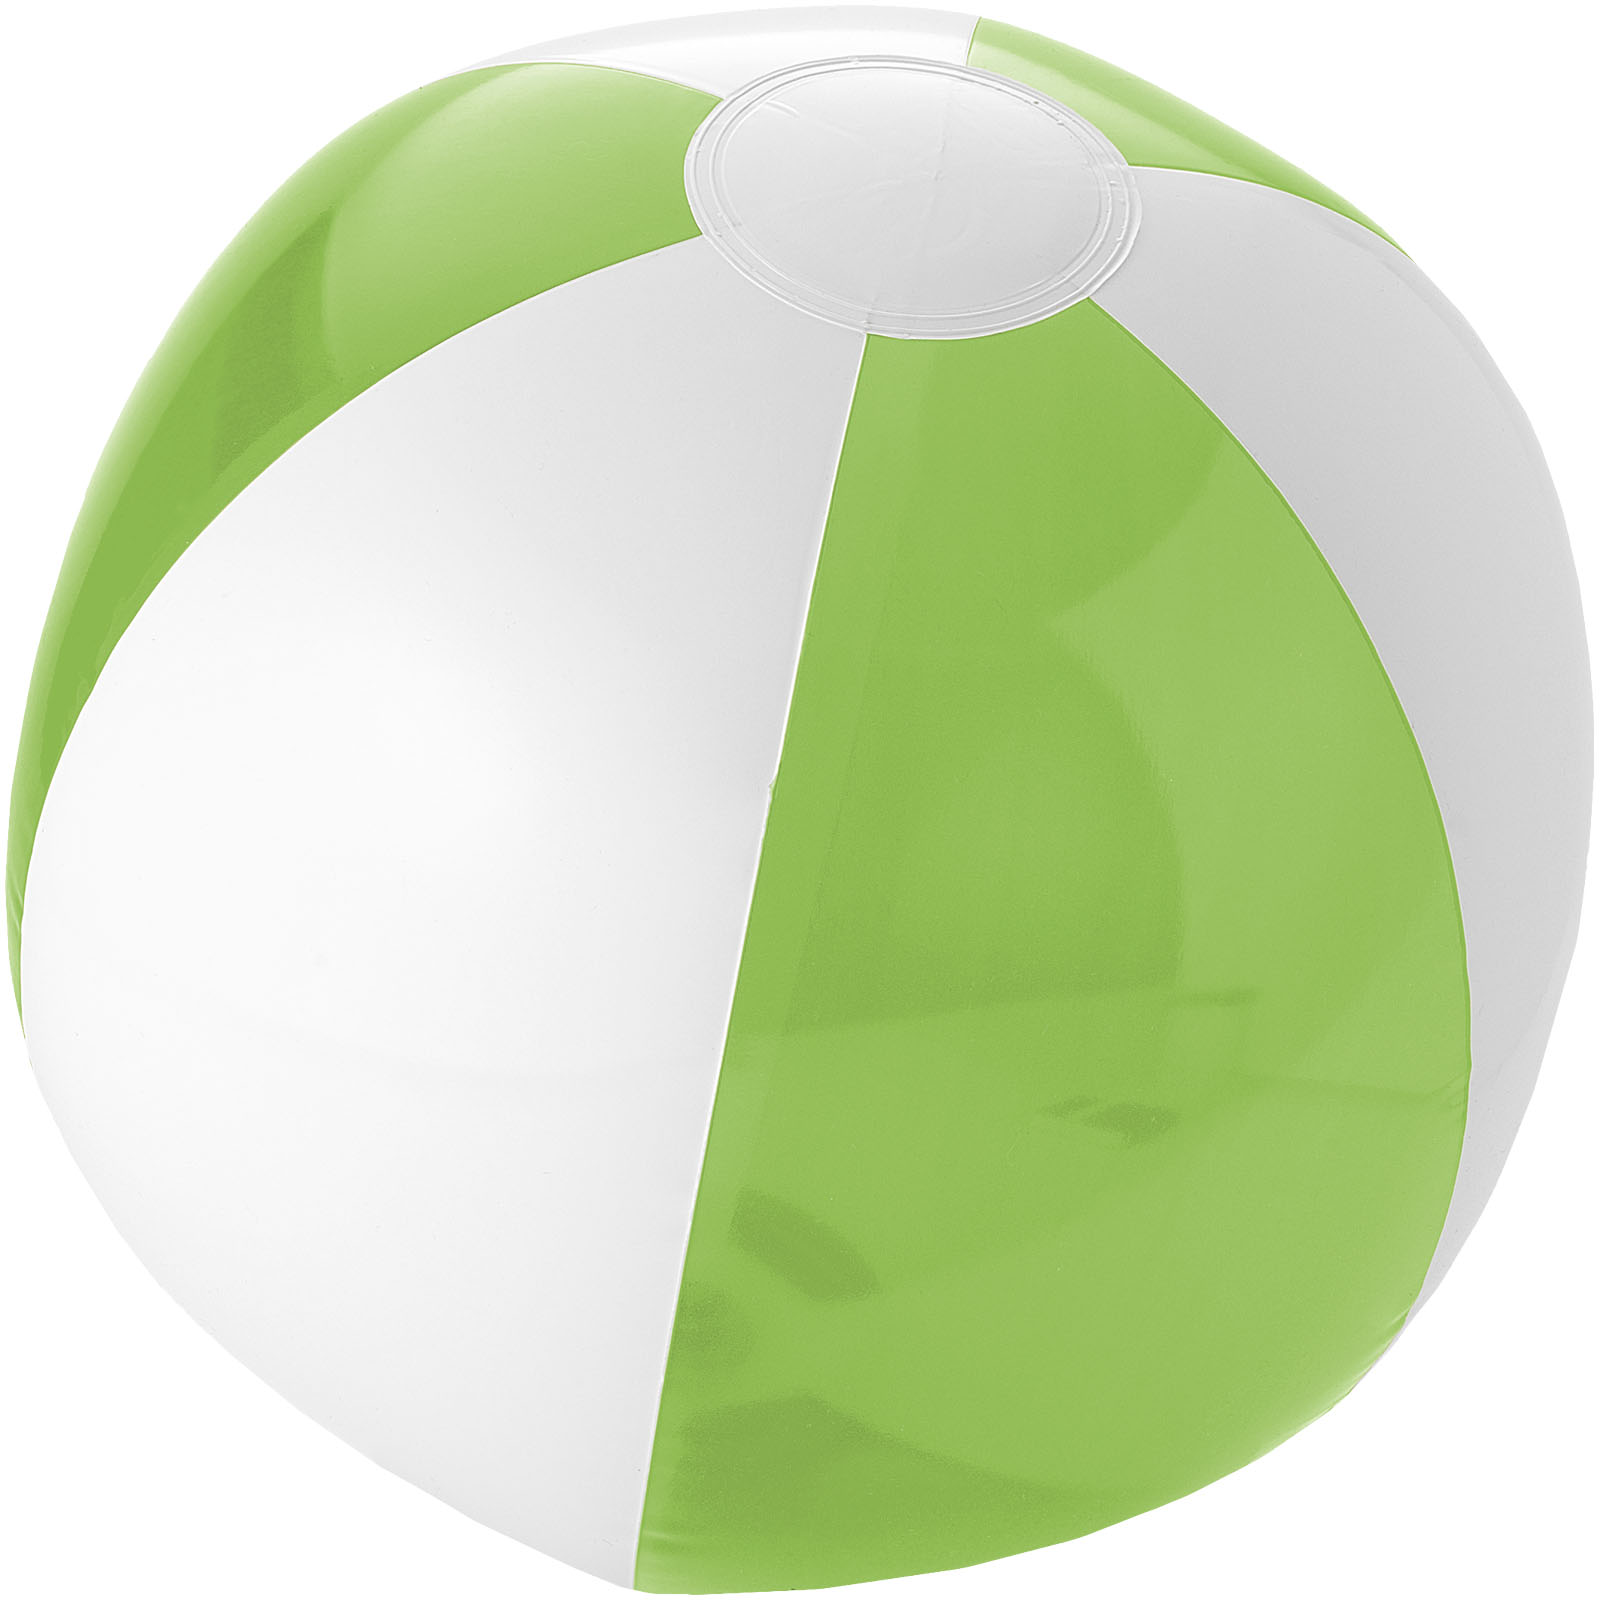 Two-Color Inflatable Beach Ball - Rossendale